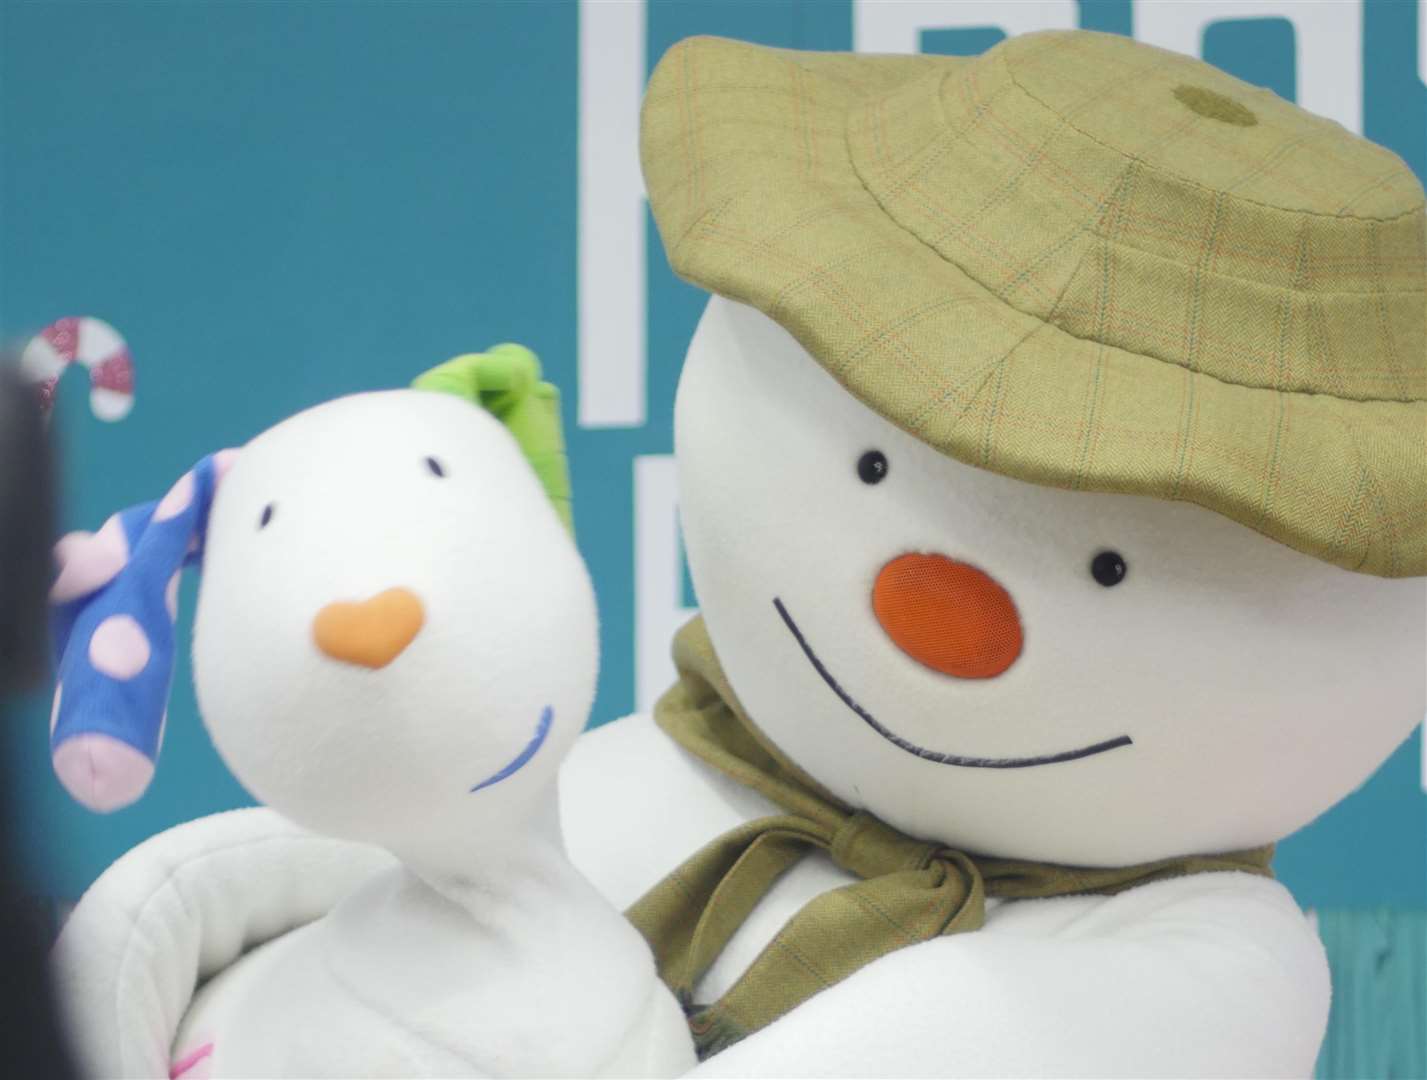 The Snowman and Snowdog (5319725)